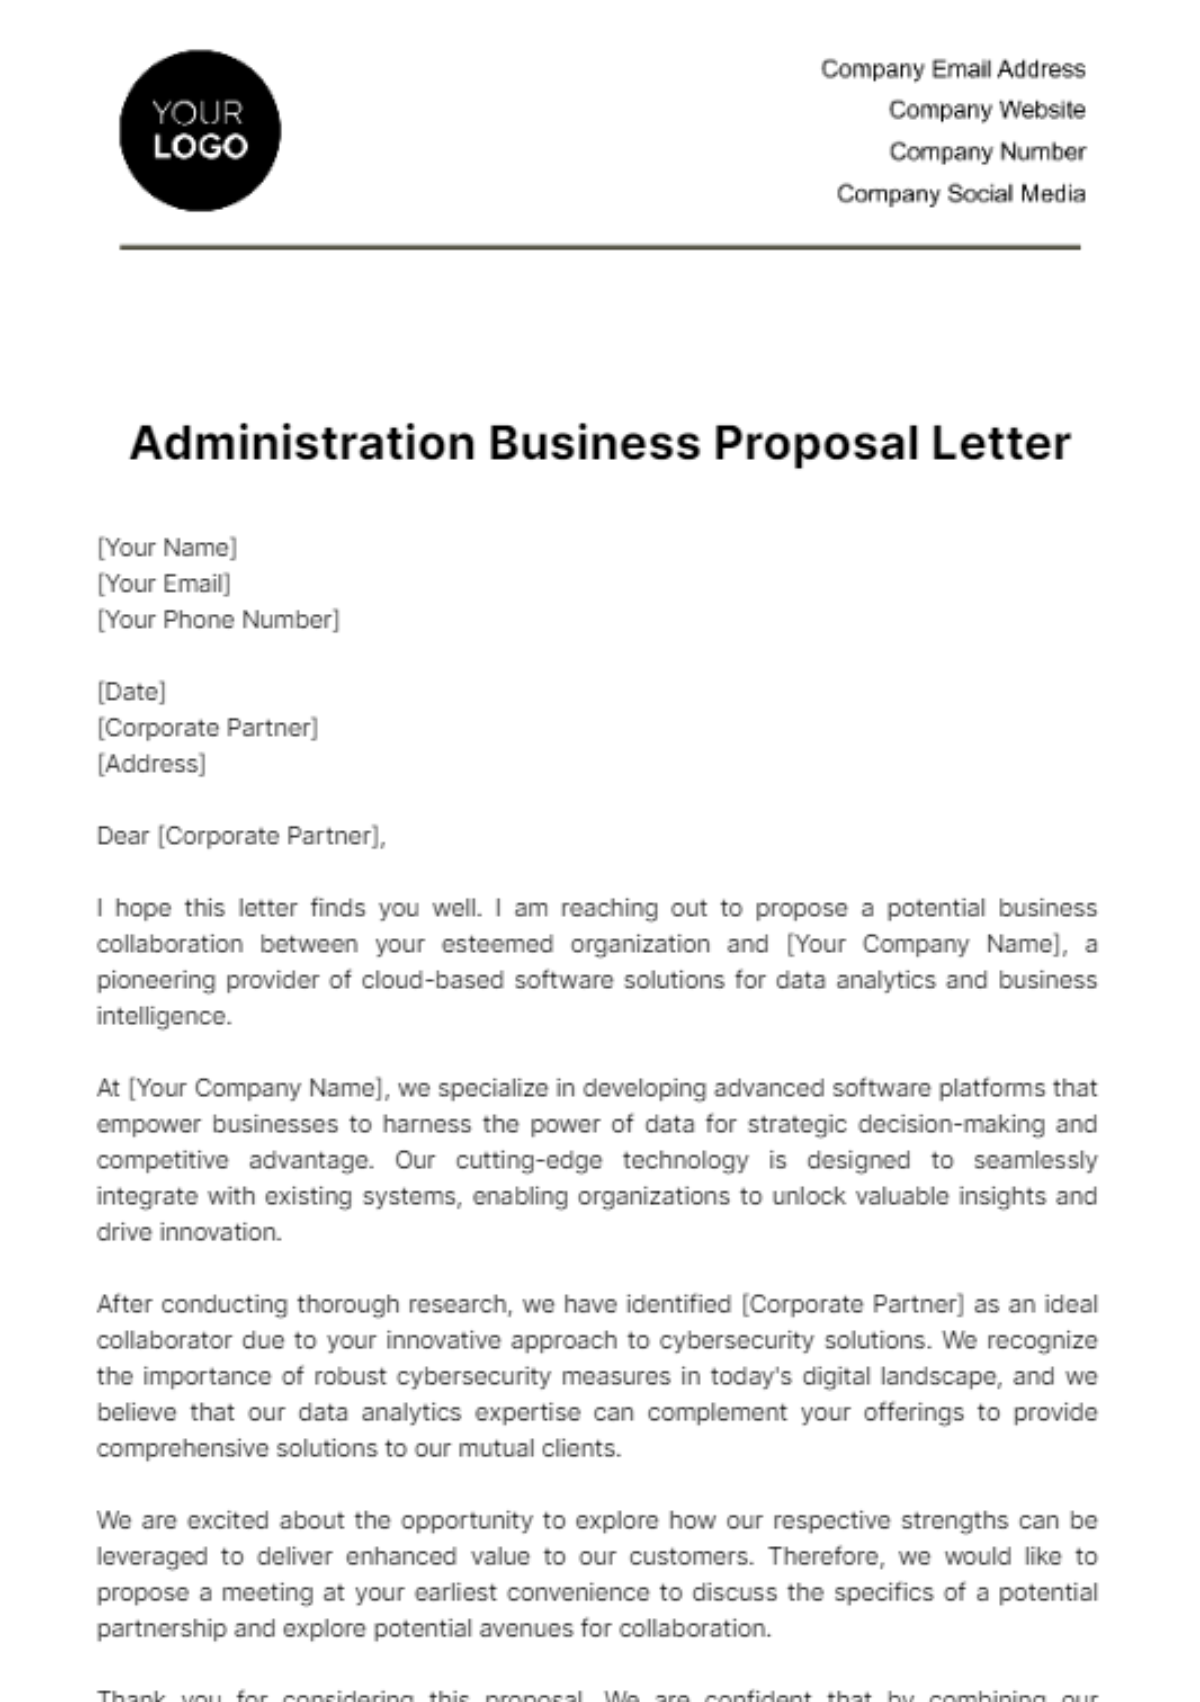 Free Administration Business Proposal Letter Template